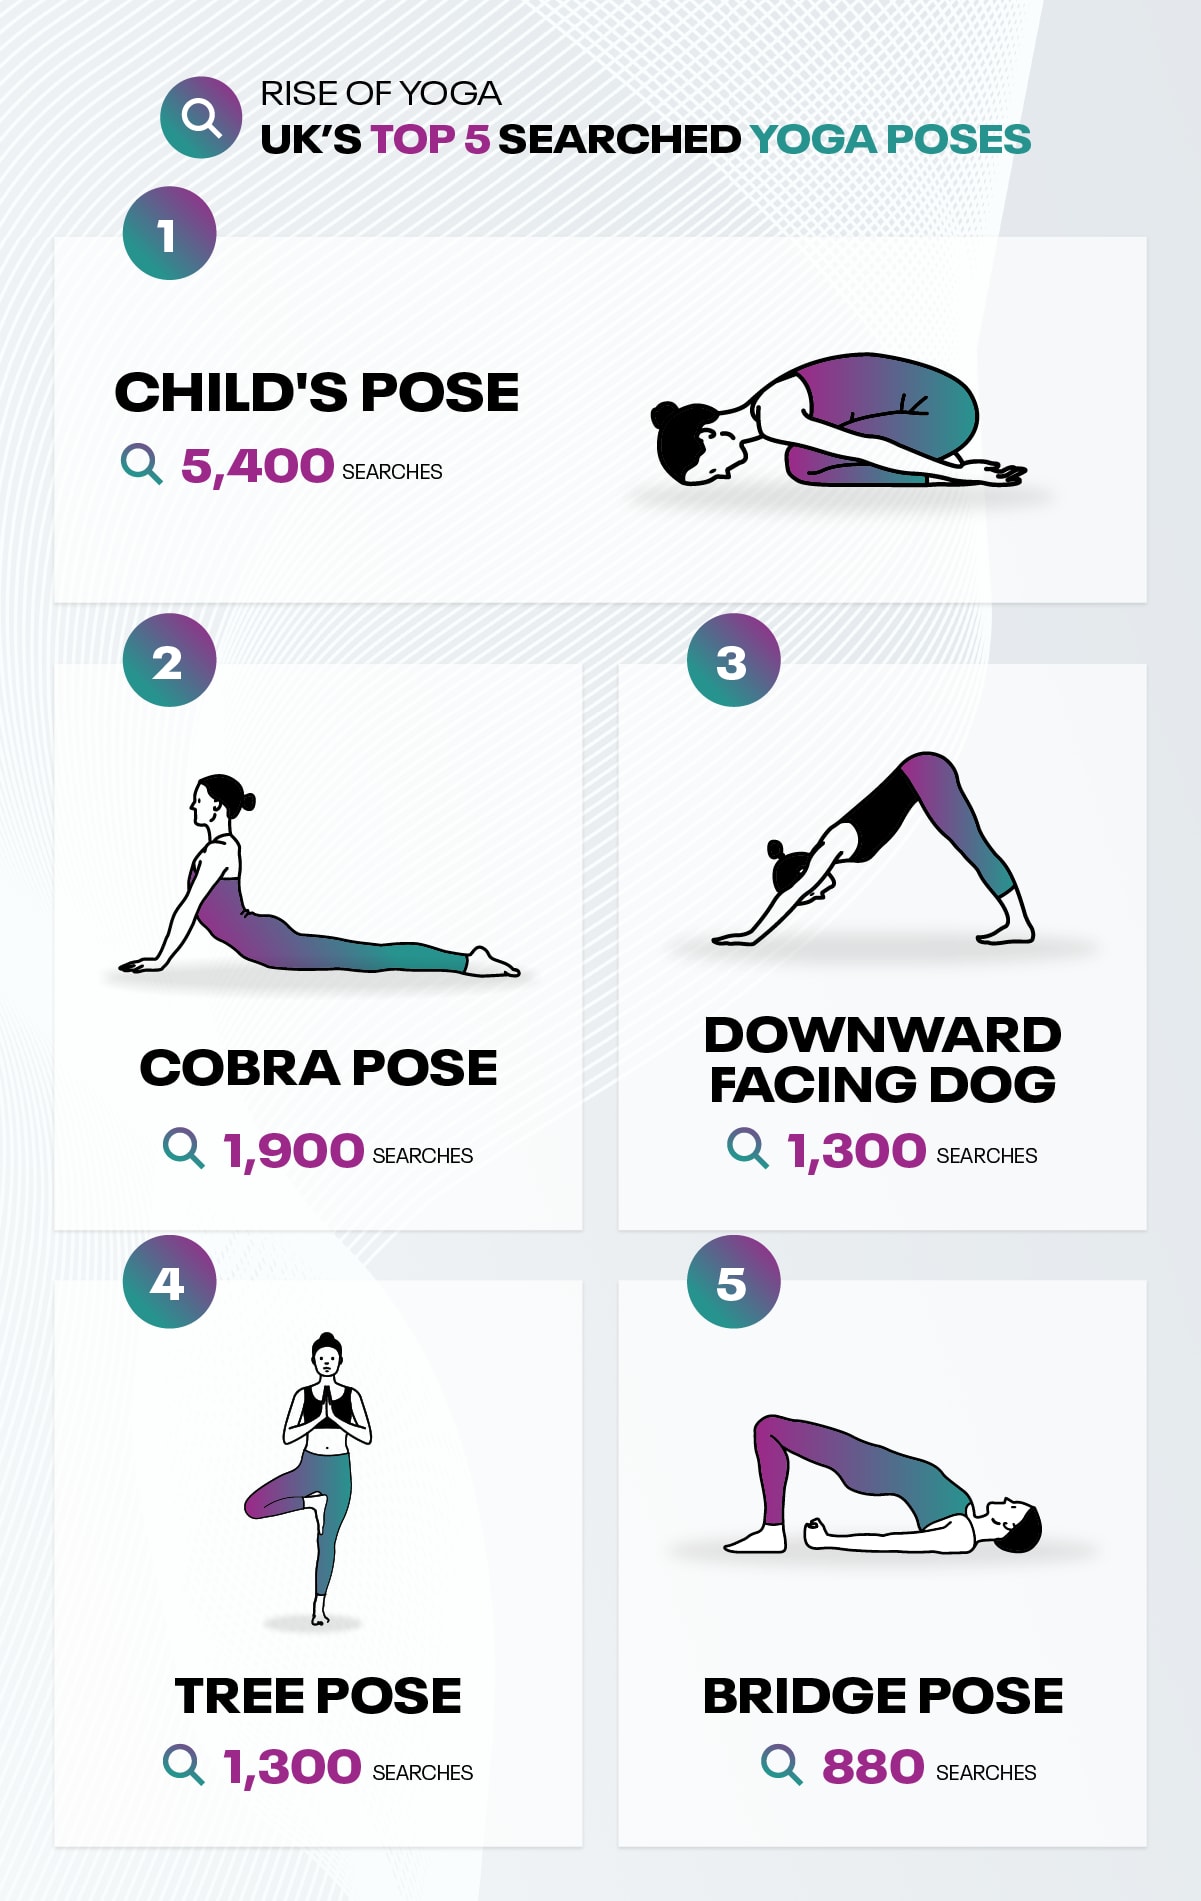 UK's top 5 searched yoga poses